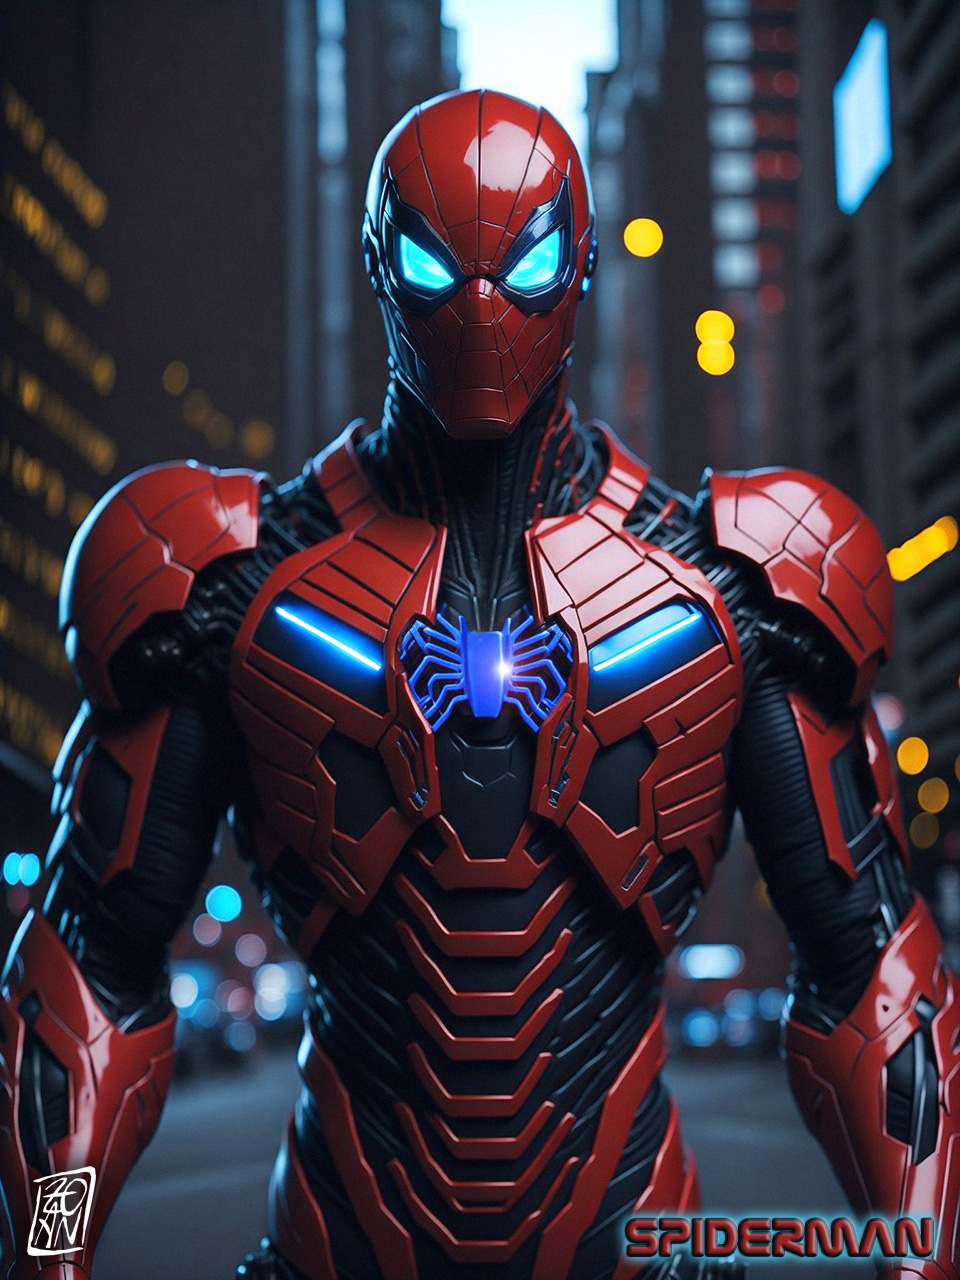 Image of SPIDERMAN (mecha suit) made with AI and Photoshop. Spiderman by MARVEL – All Rights Reserved